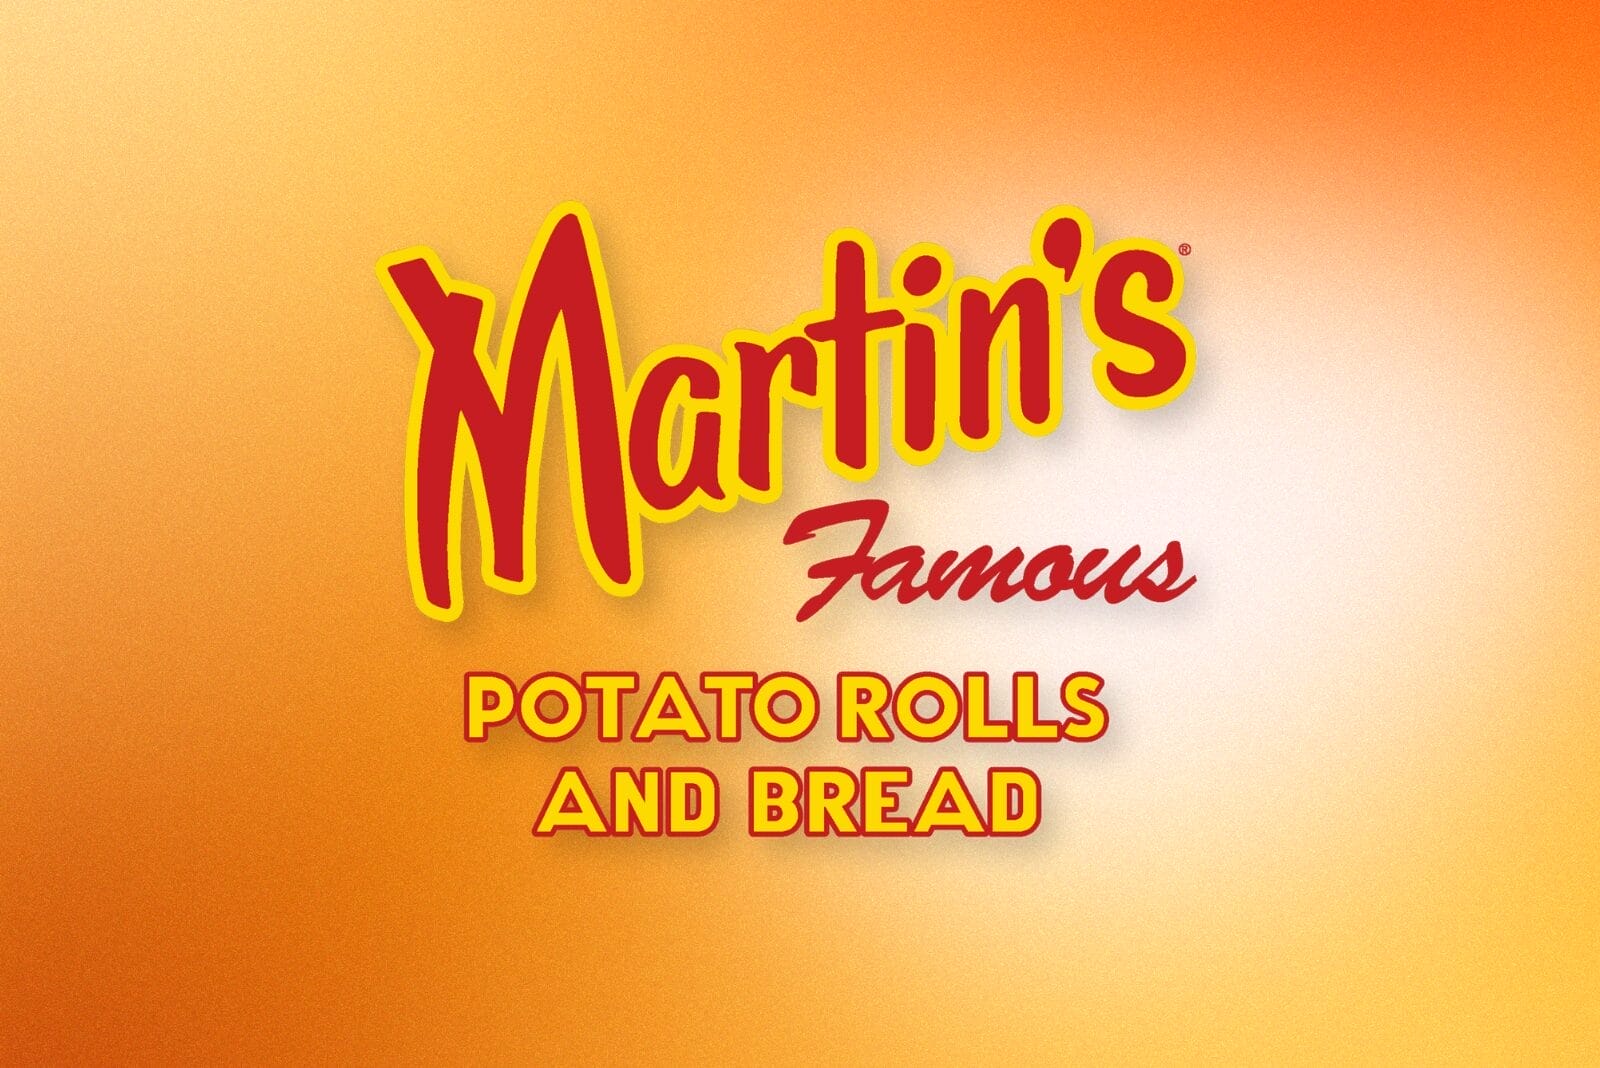 Martin's Famous Potato Rolls and Bread logo over a gradient background